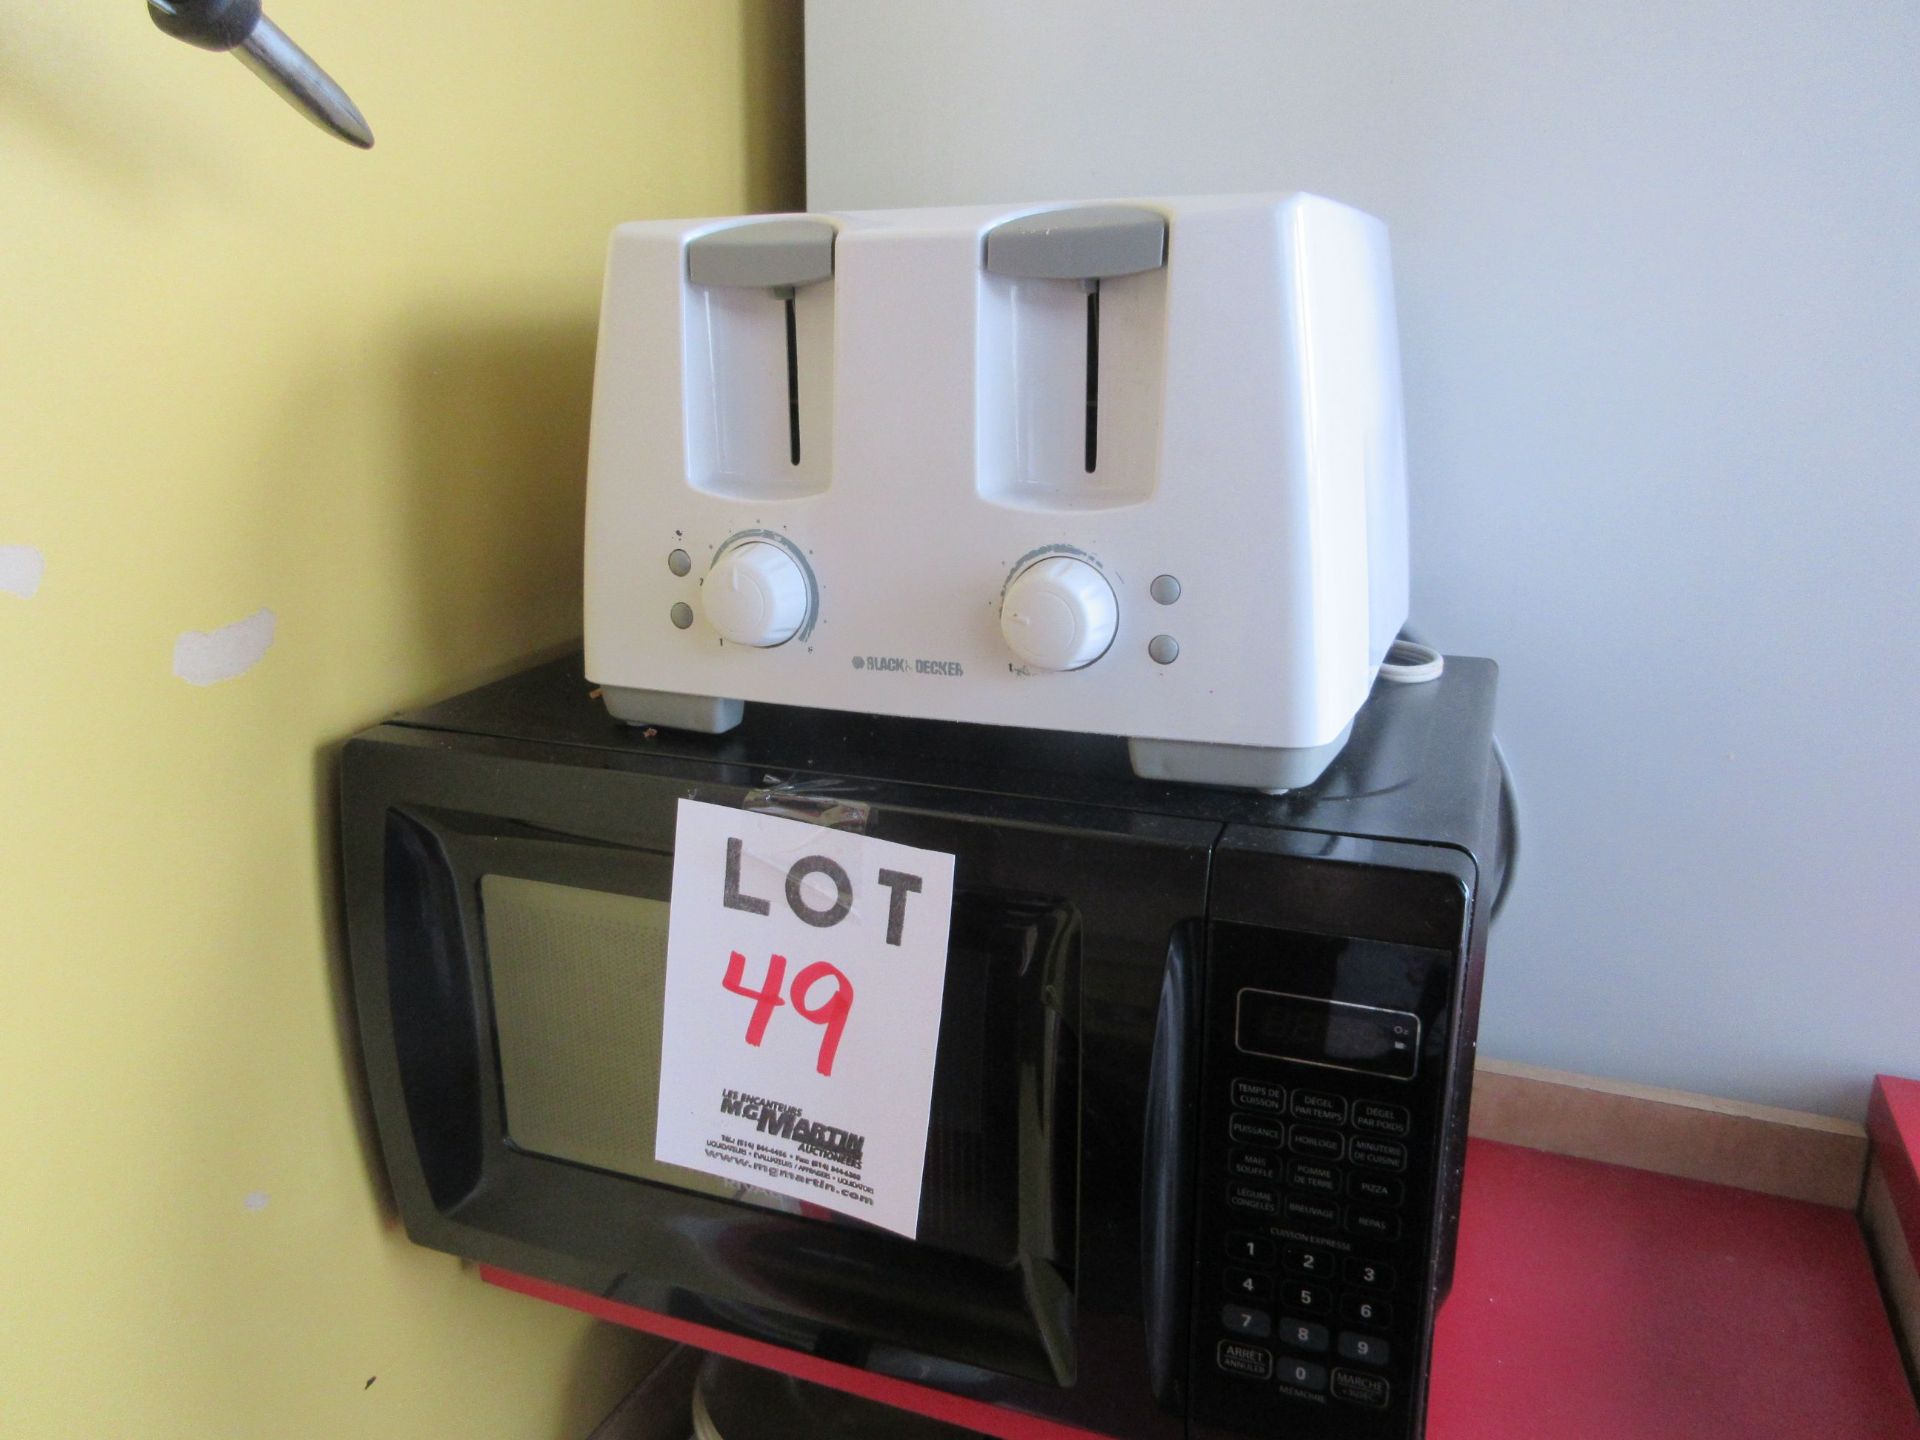 LOT including microwave oven, toaster, etc. - Image 2 of 3